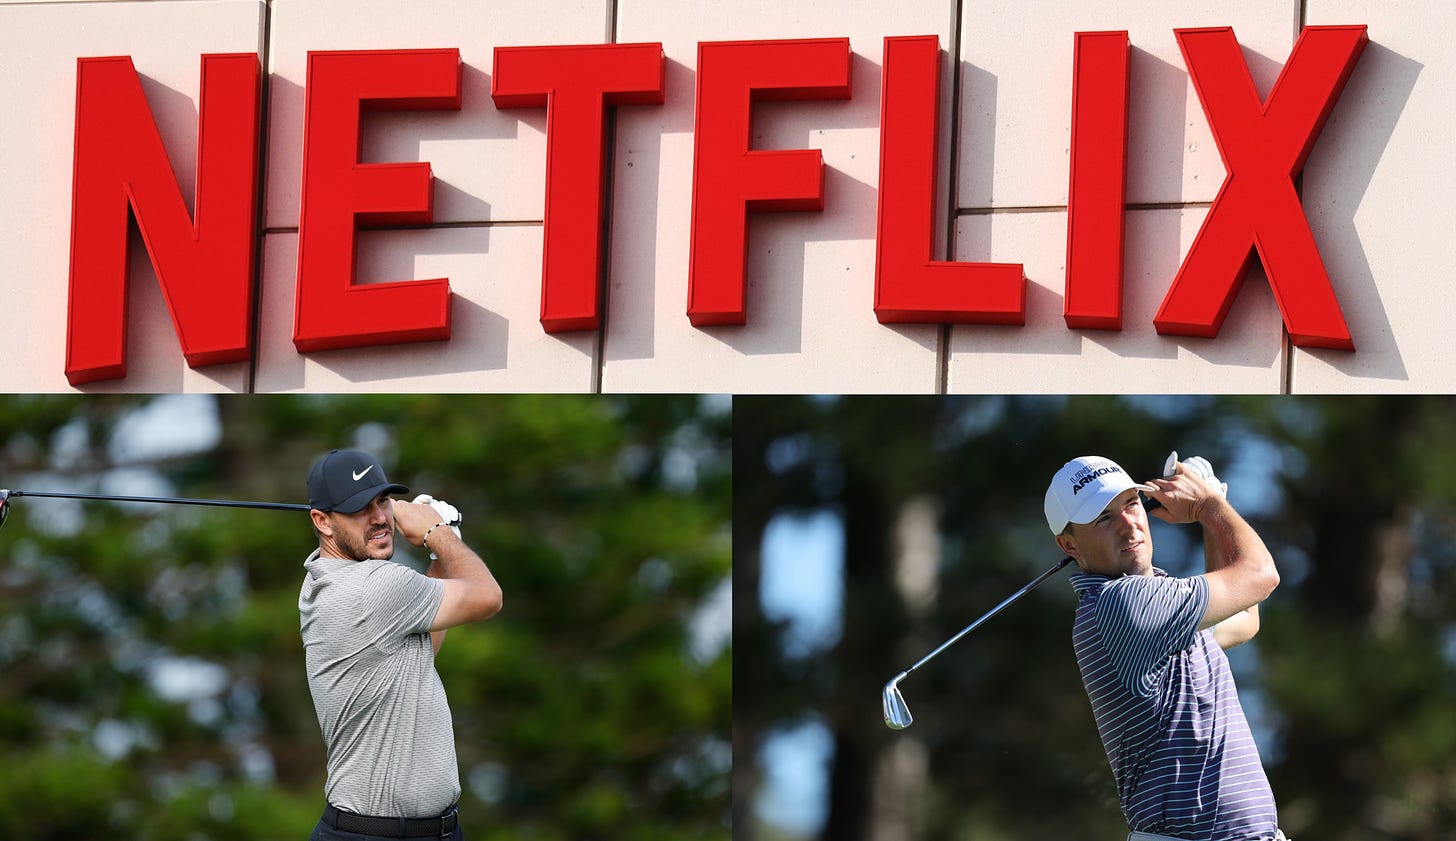 PGA Tour Netflix Docuseries - All You Need To Know | Golf Monthly